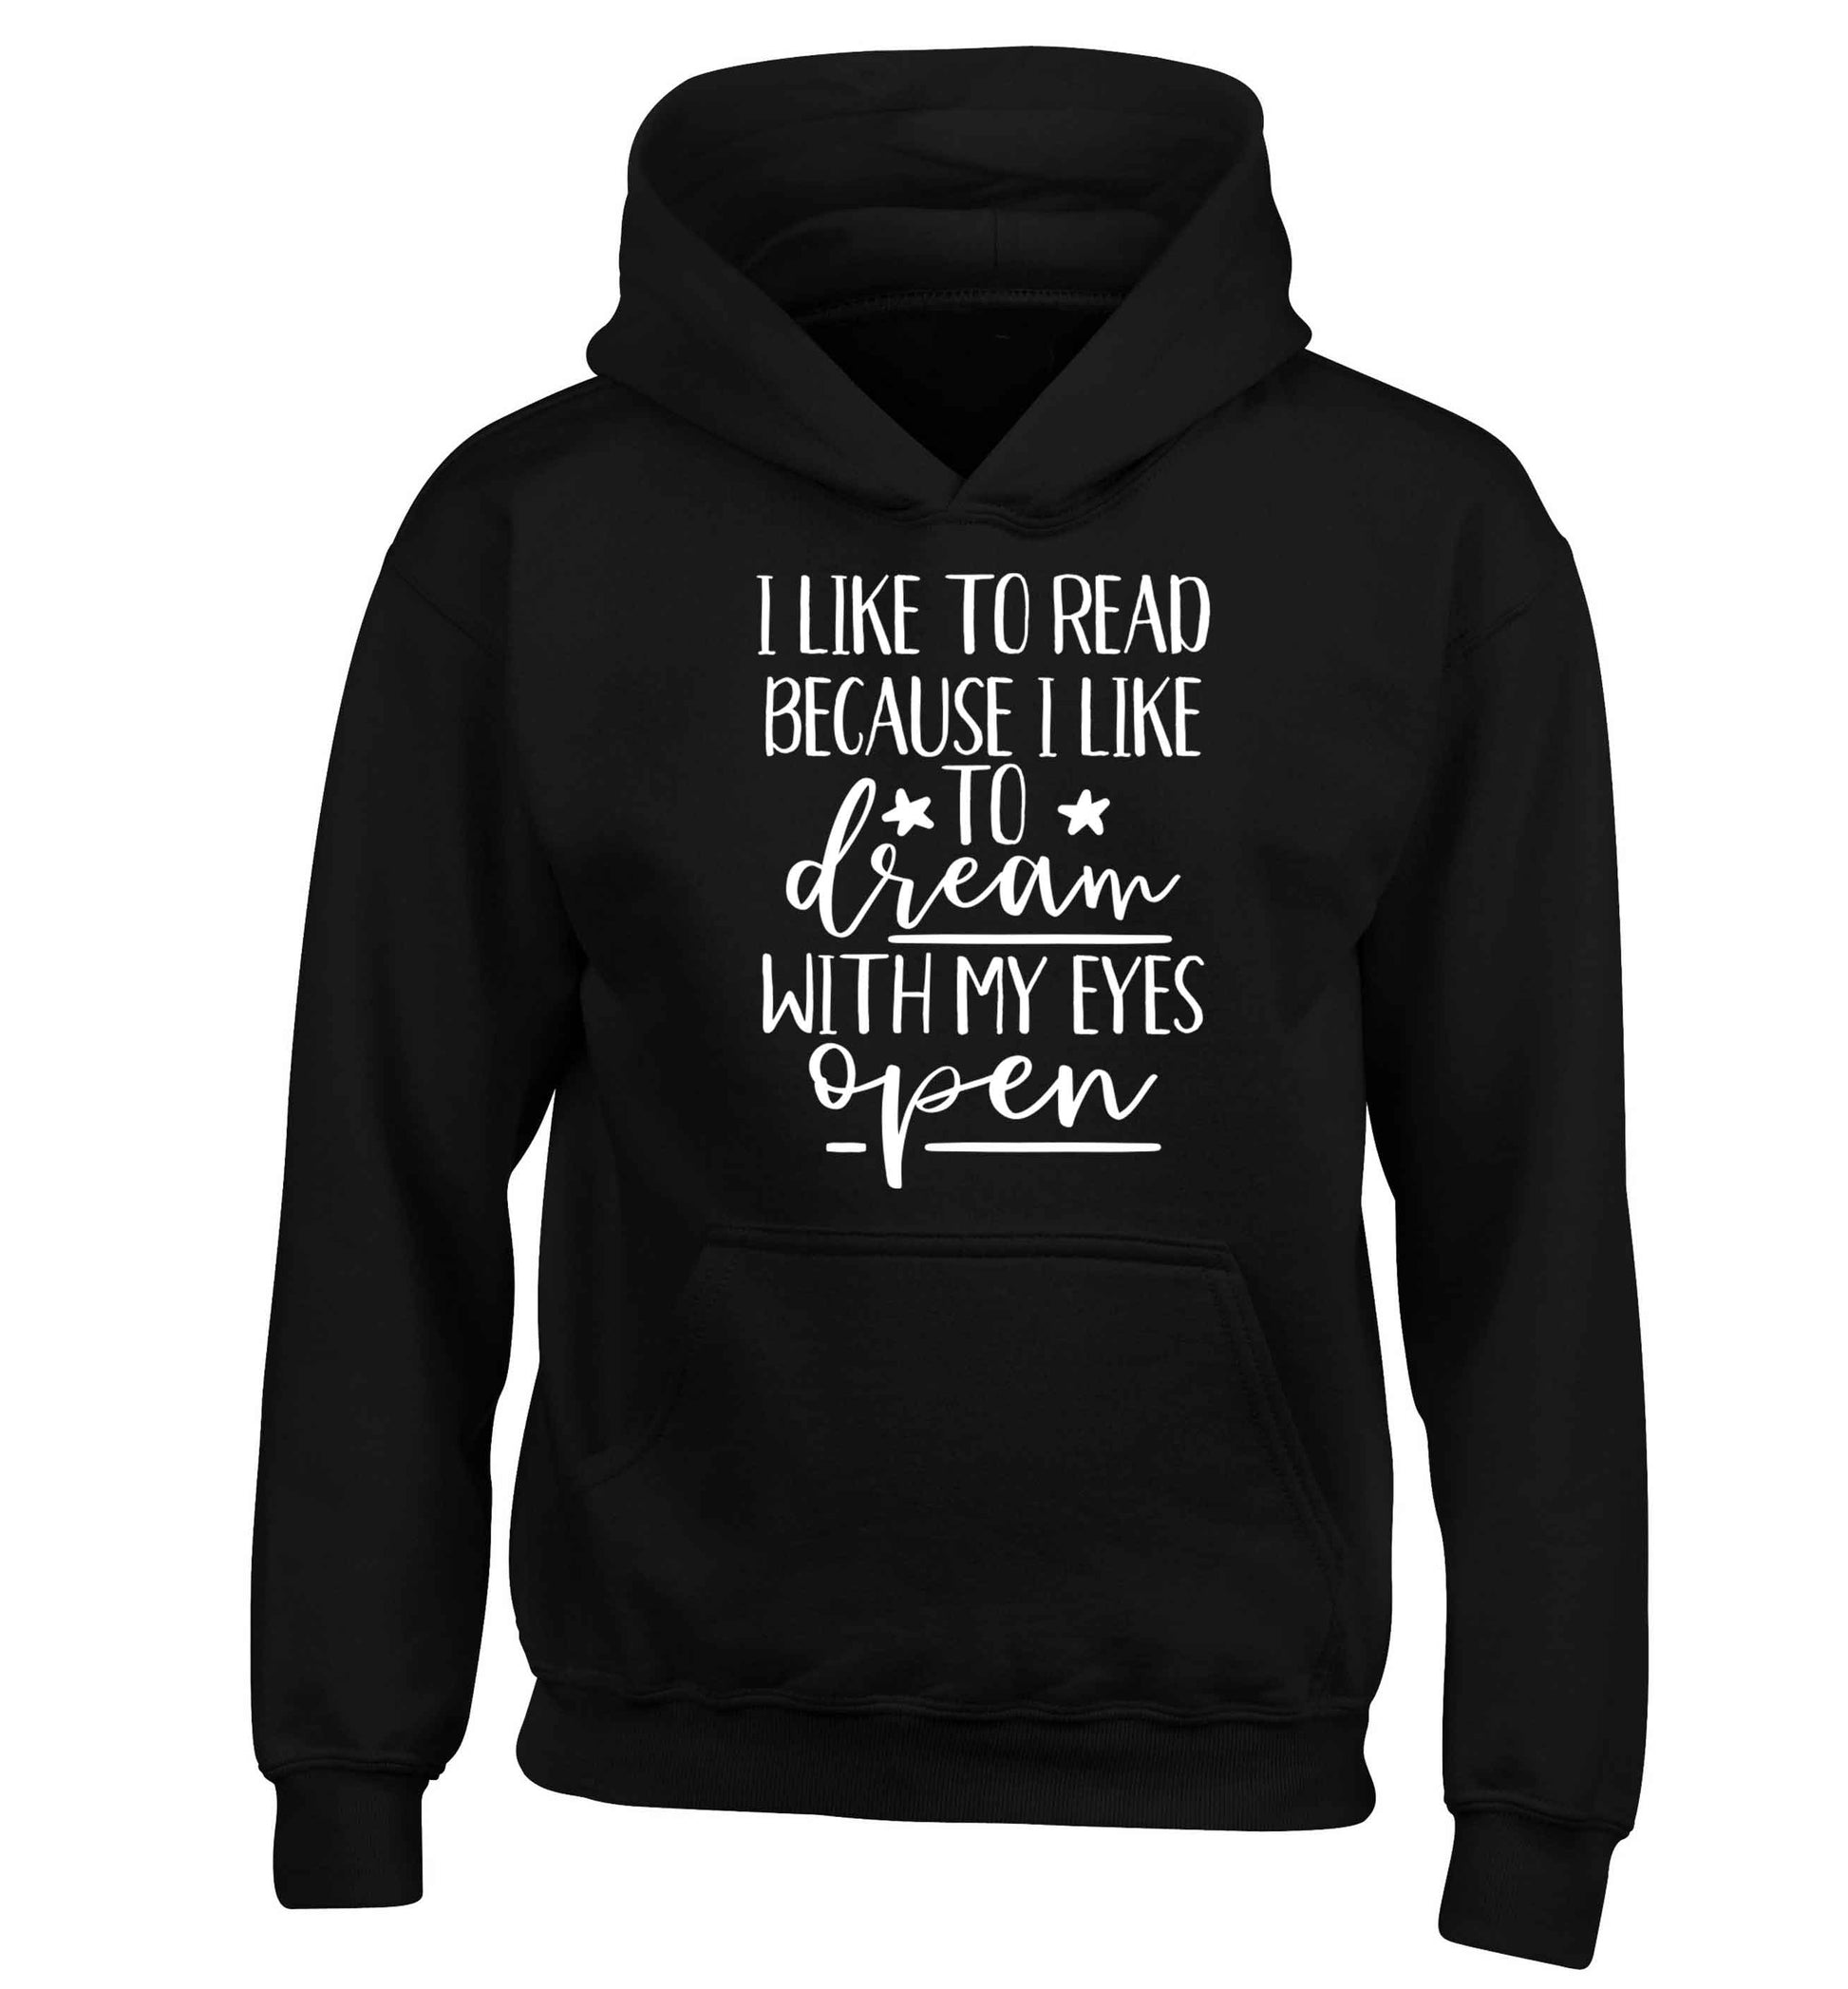 I like to read because I like to dream with my eyes open children's black hoodie 12-13 Years